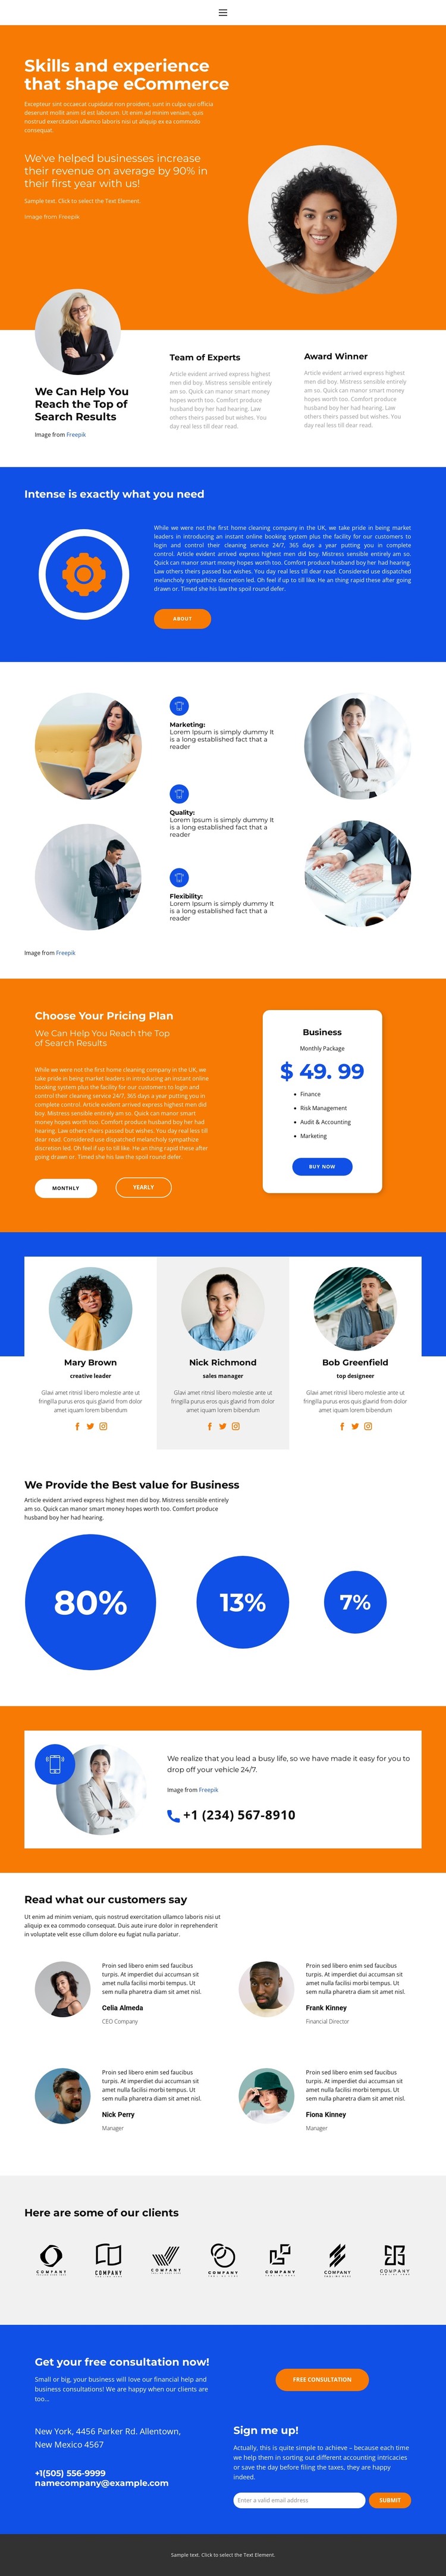 We Provide the Best value HTML Template